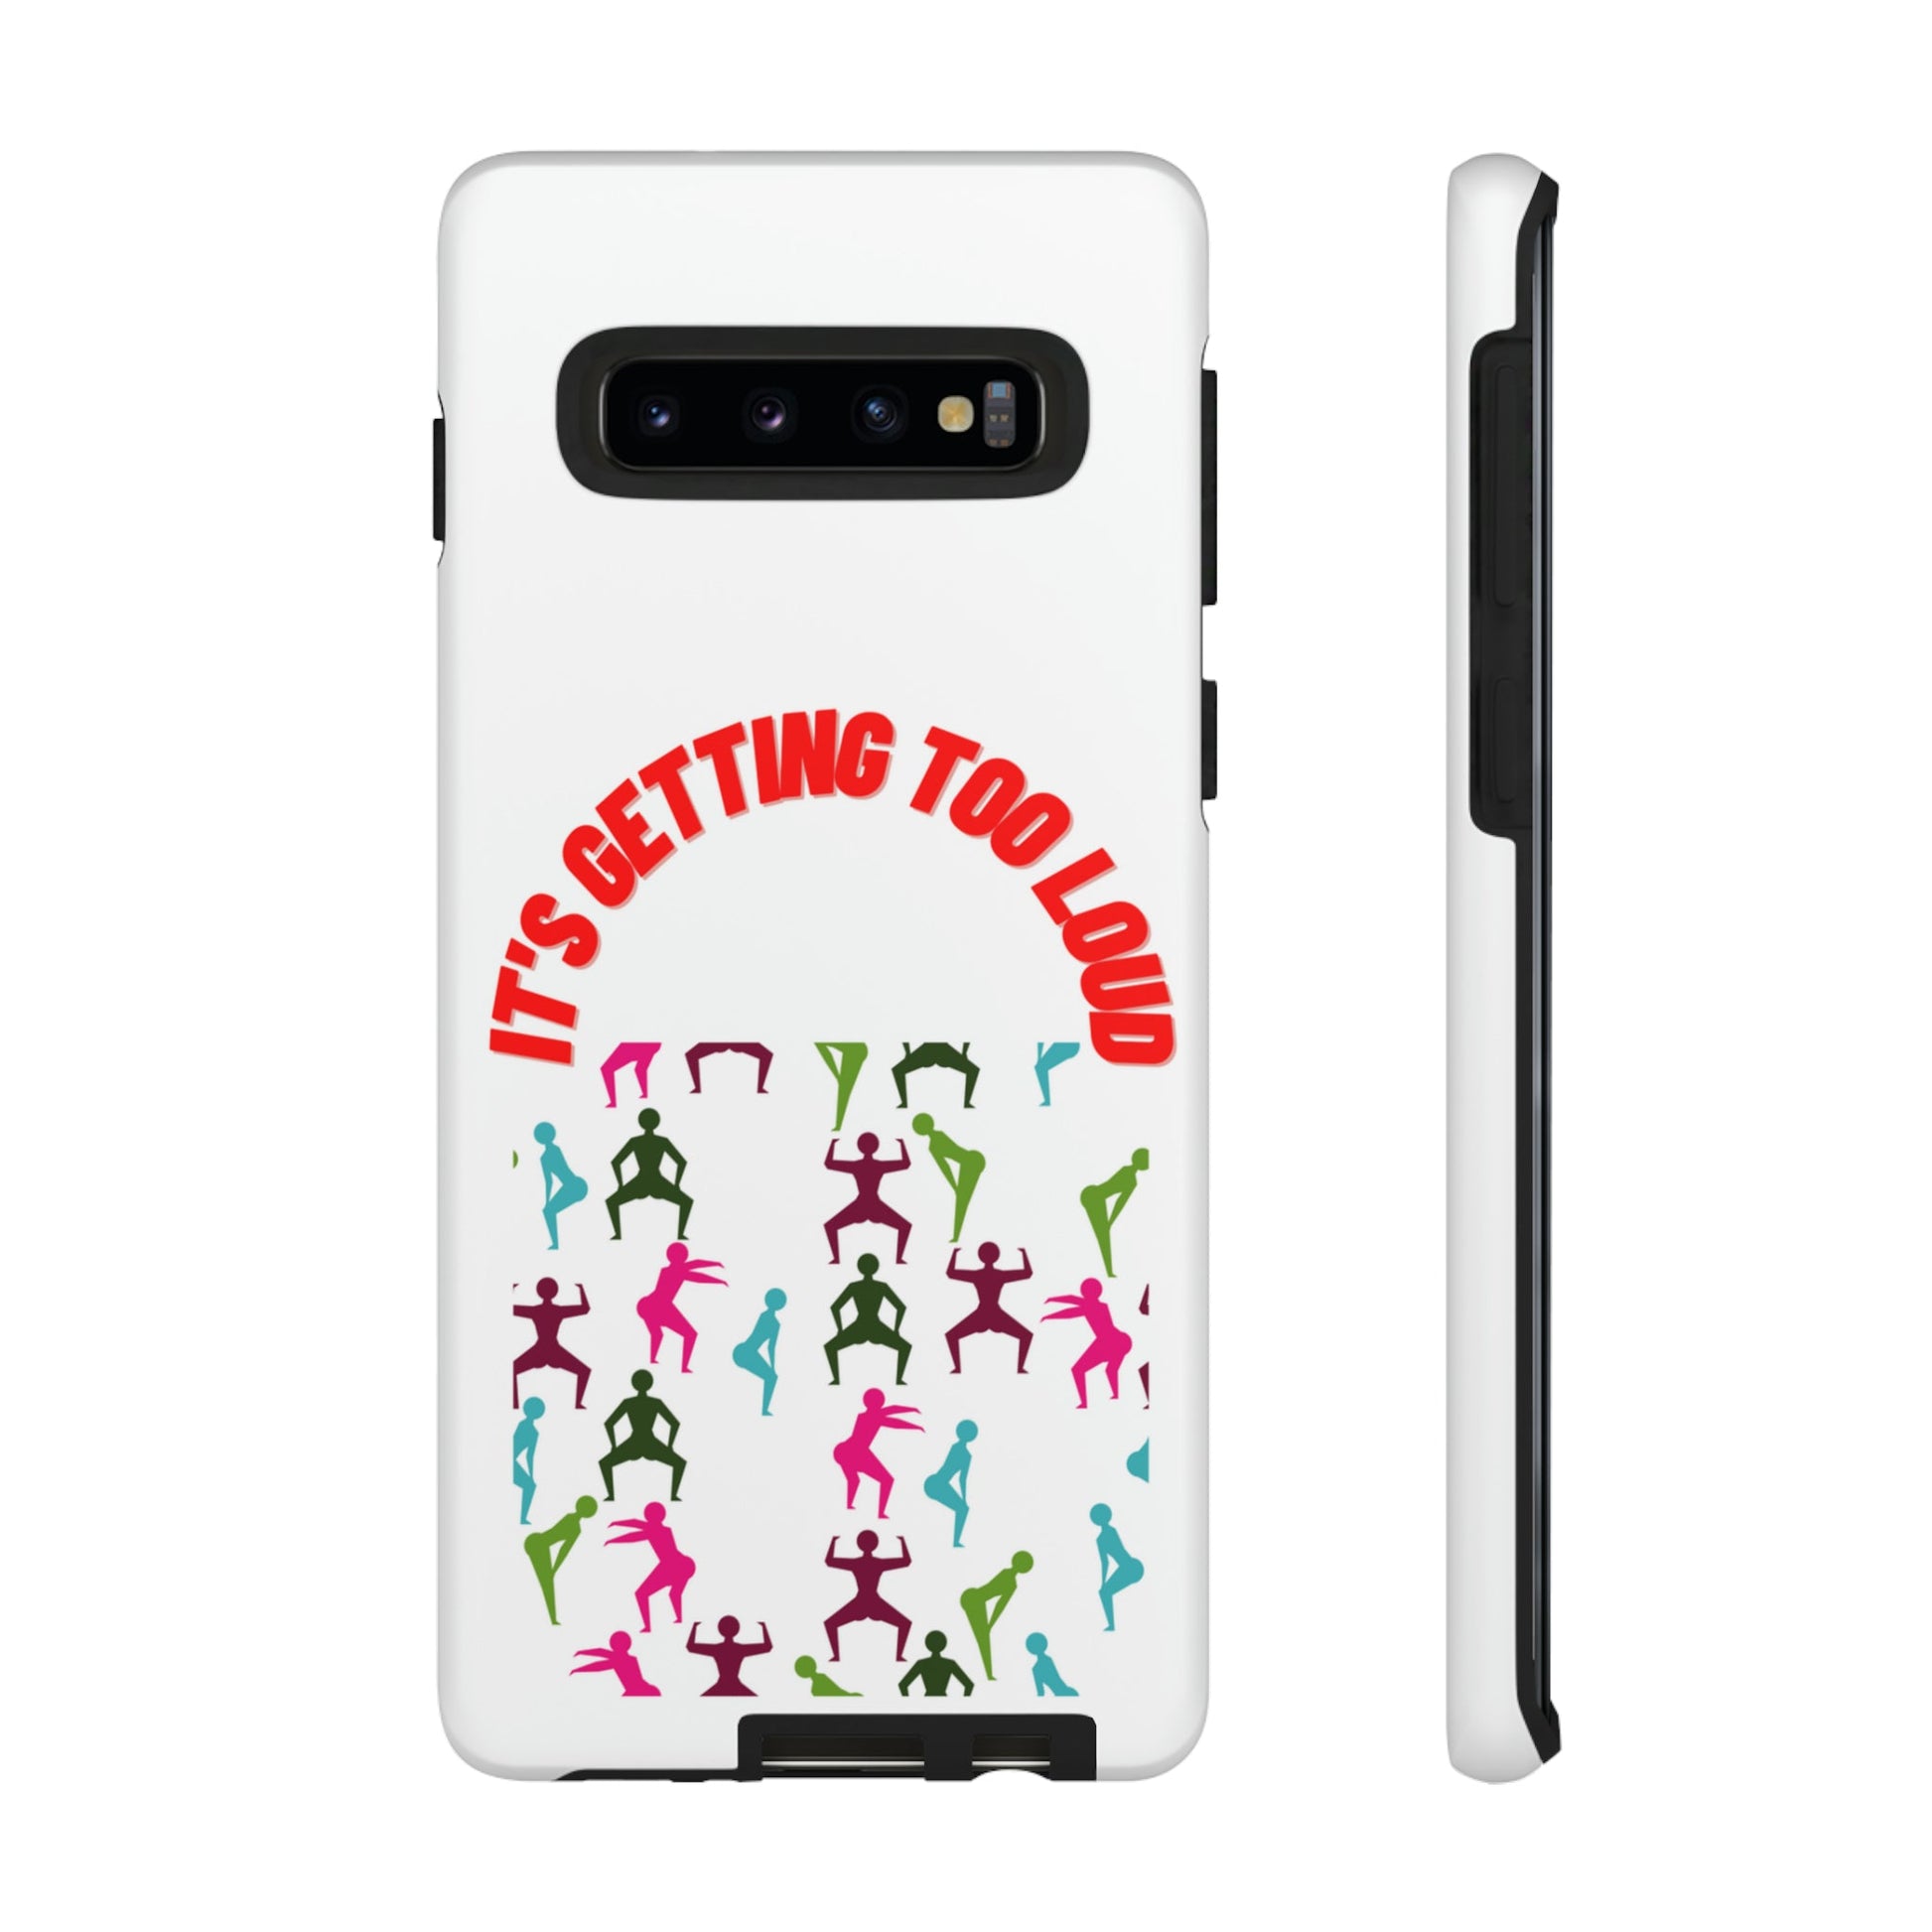 Phone Case - It's Getting Too Loud Tough Cases For IPhone And Samsung